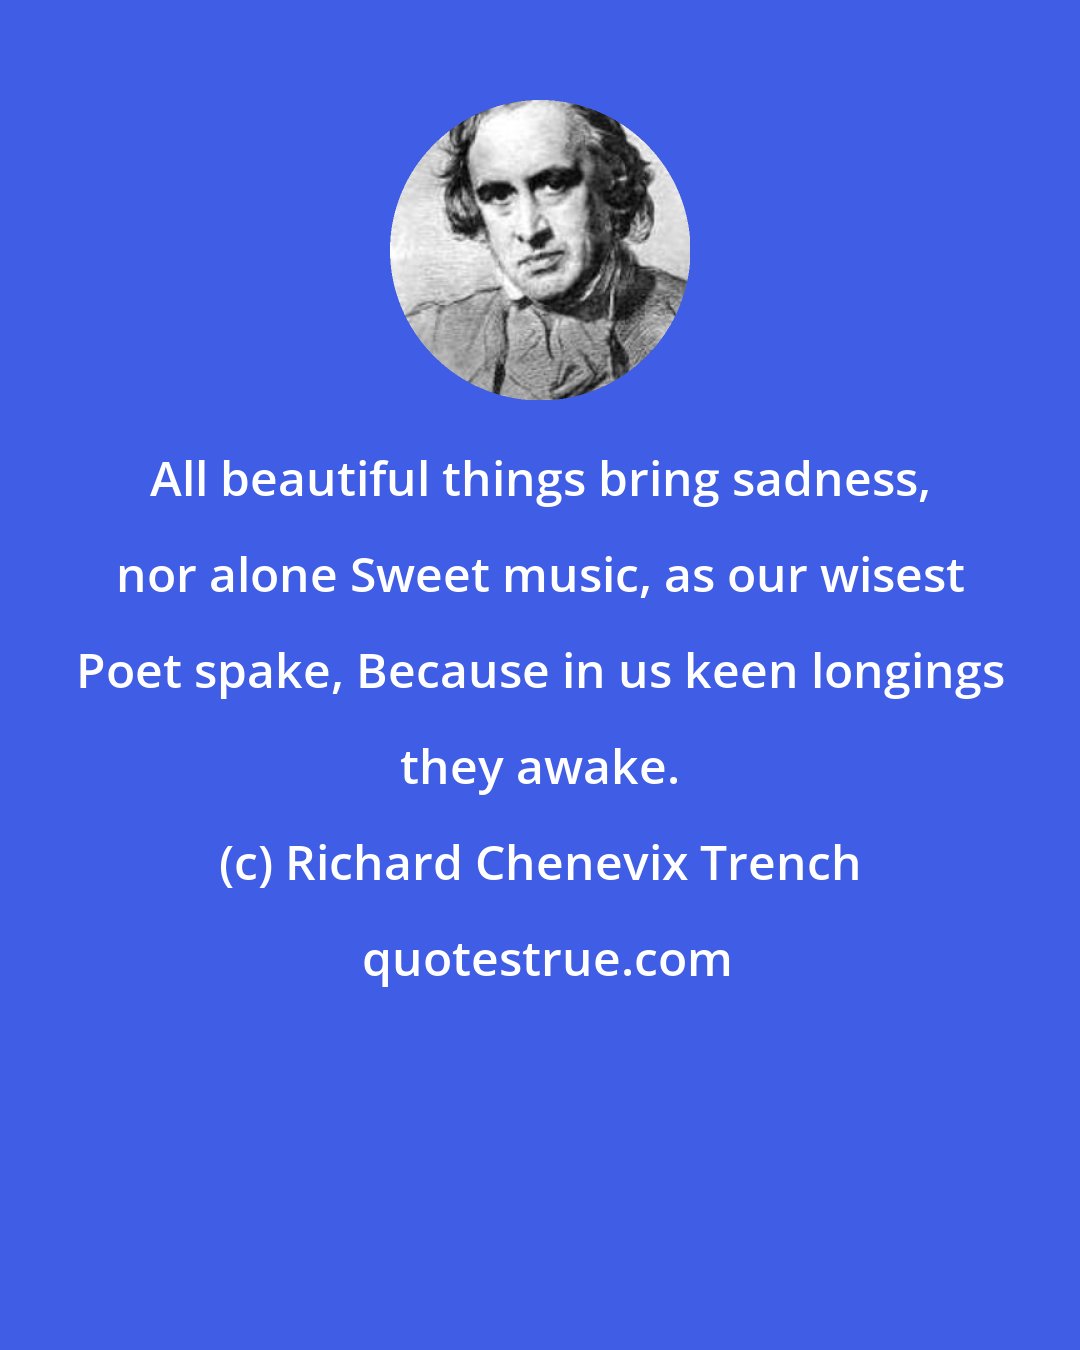 Richard Chenevix Trench: All beautiful things bring sadness, nor alone Sweet music, as our wisest Poet spake, Because in us keen longings they awake.